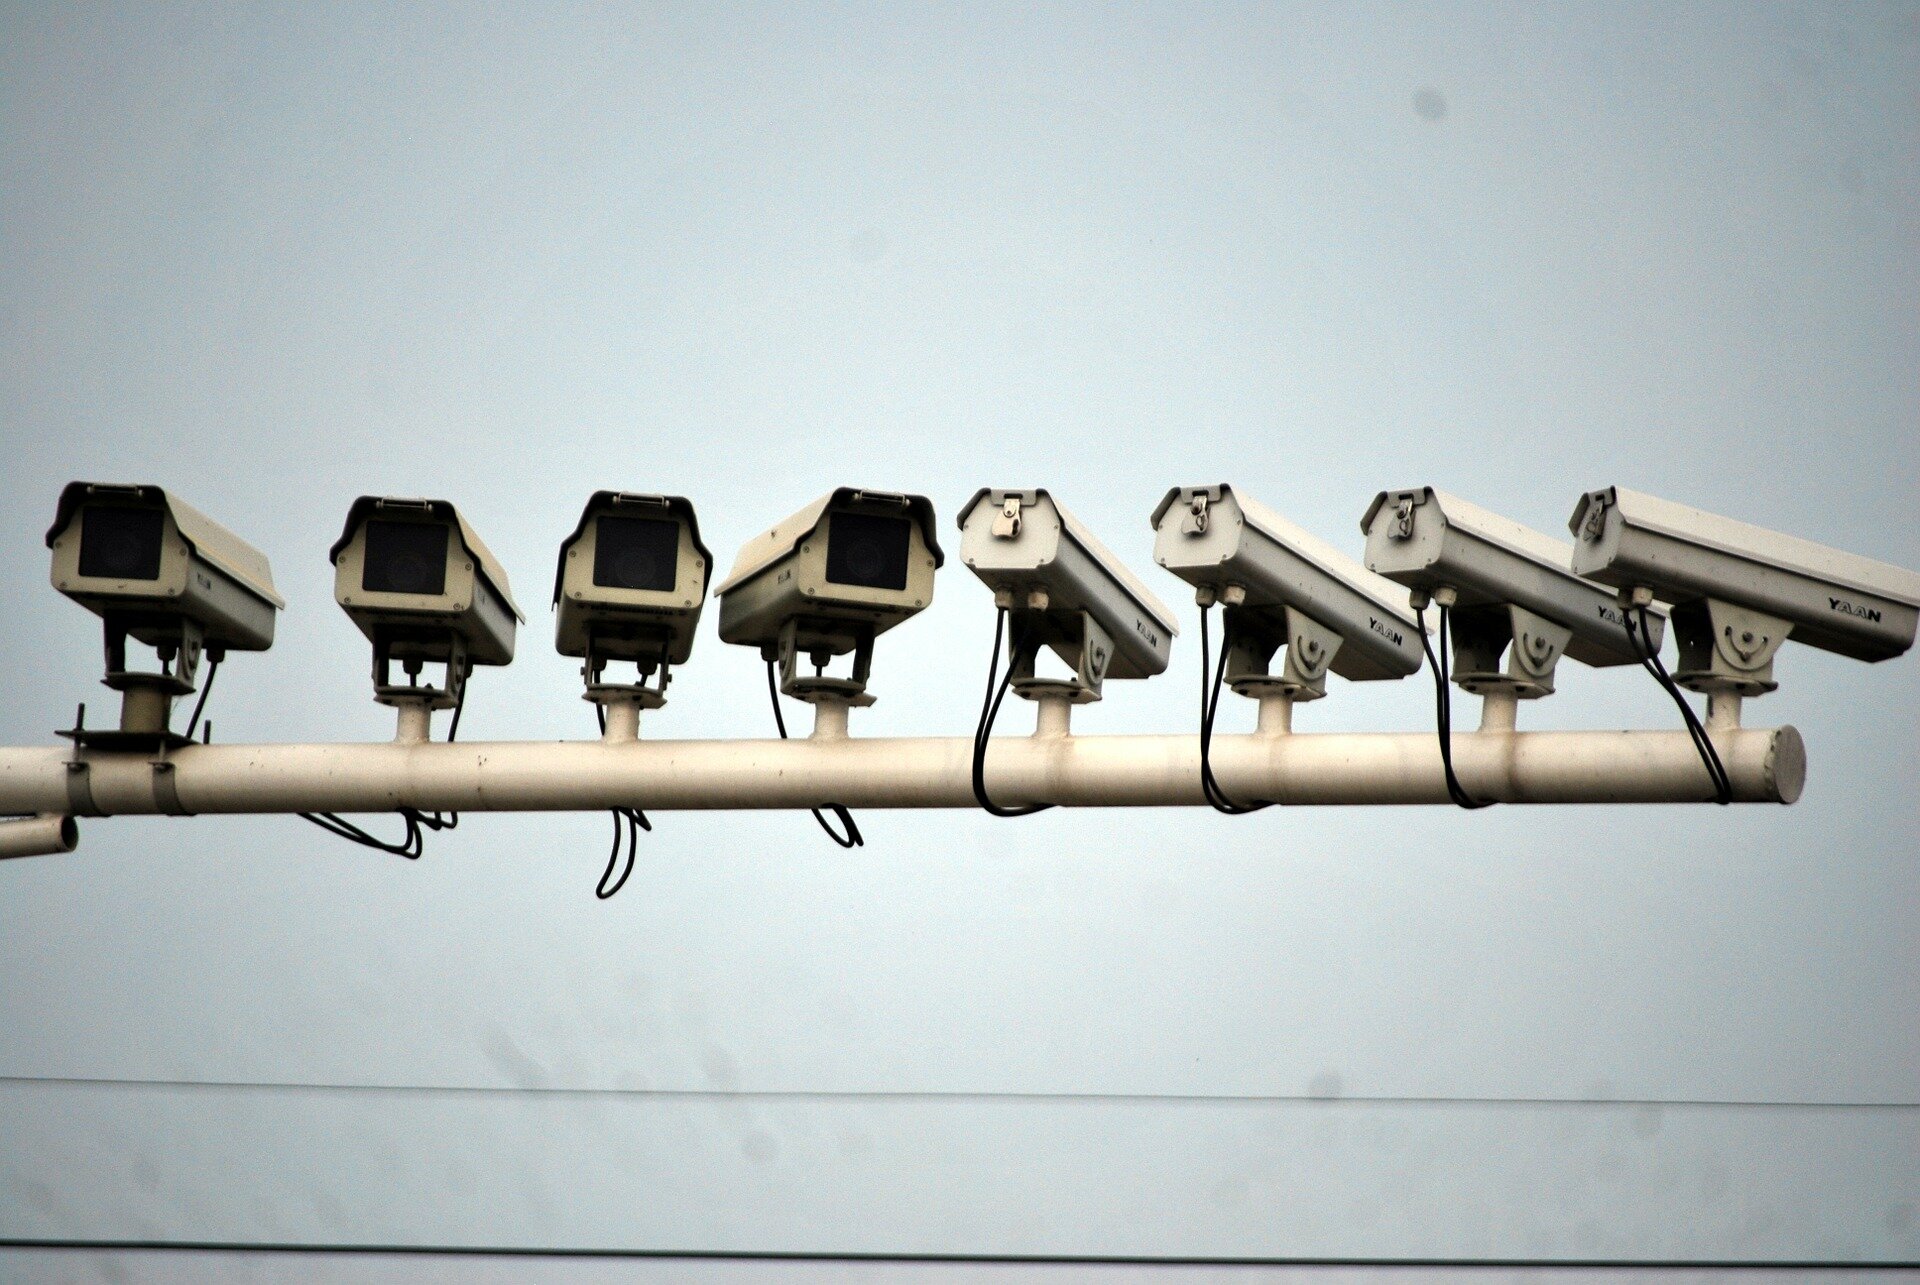 License plate cameras can help police, but privacy concerns raise call for regulation